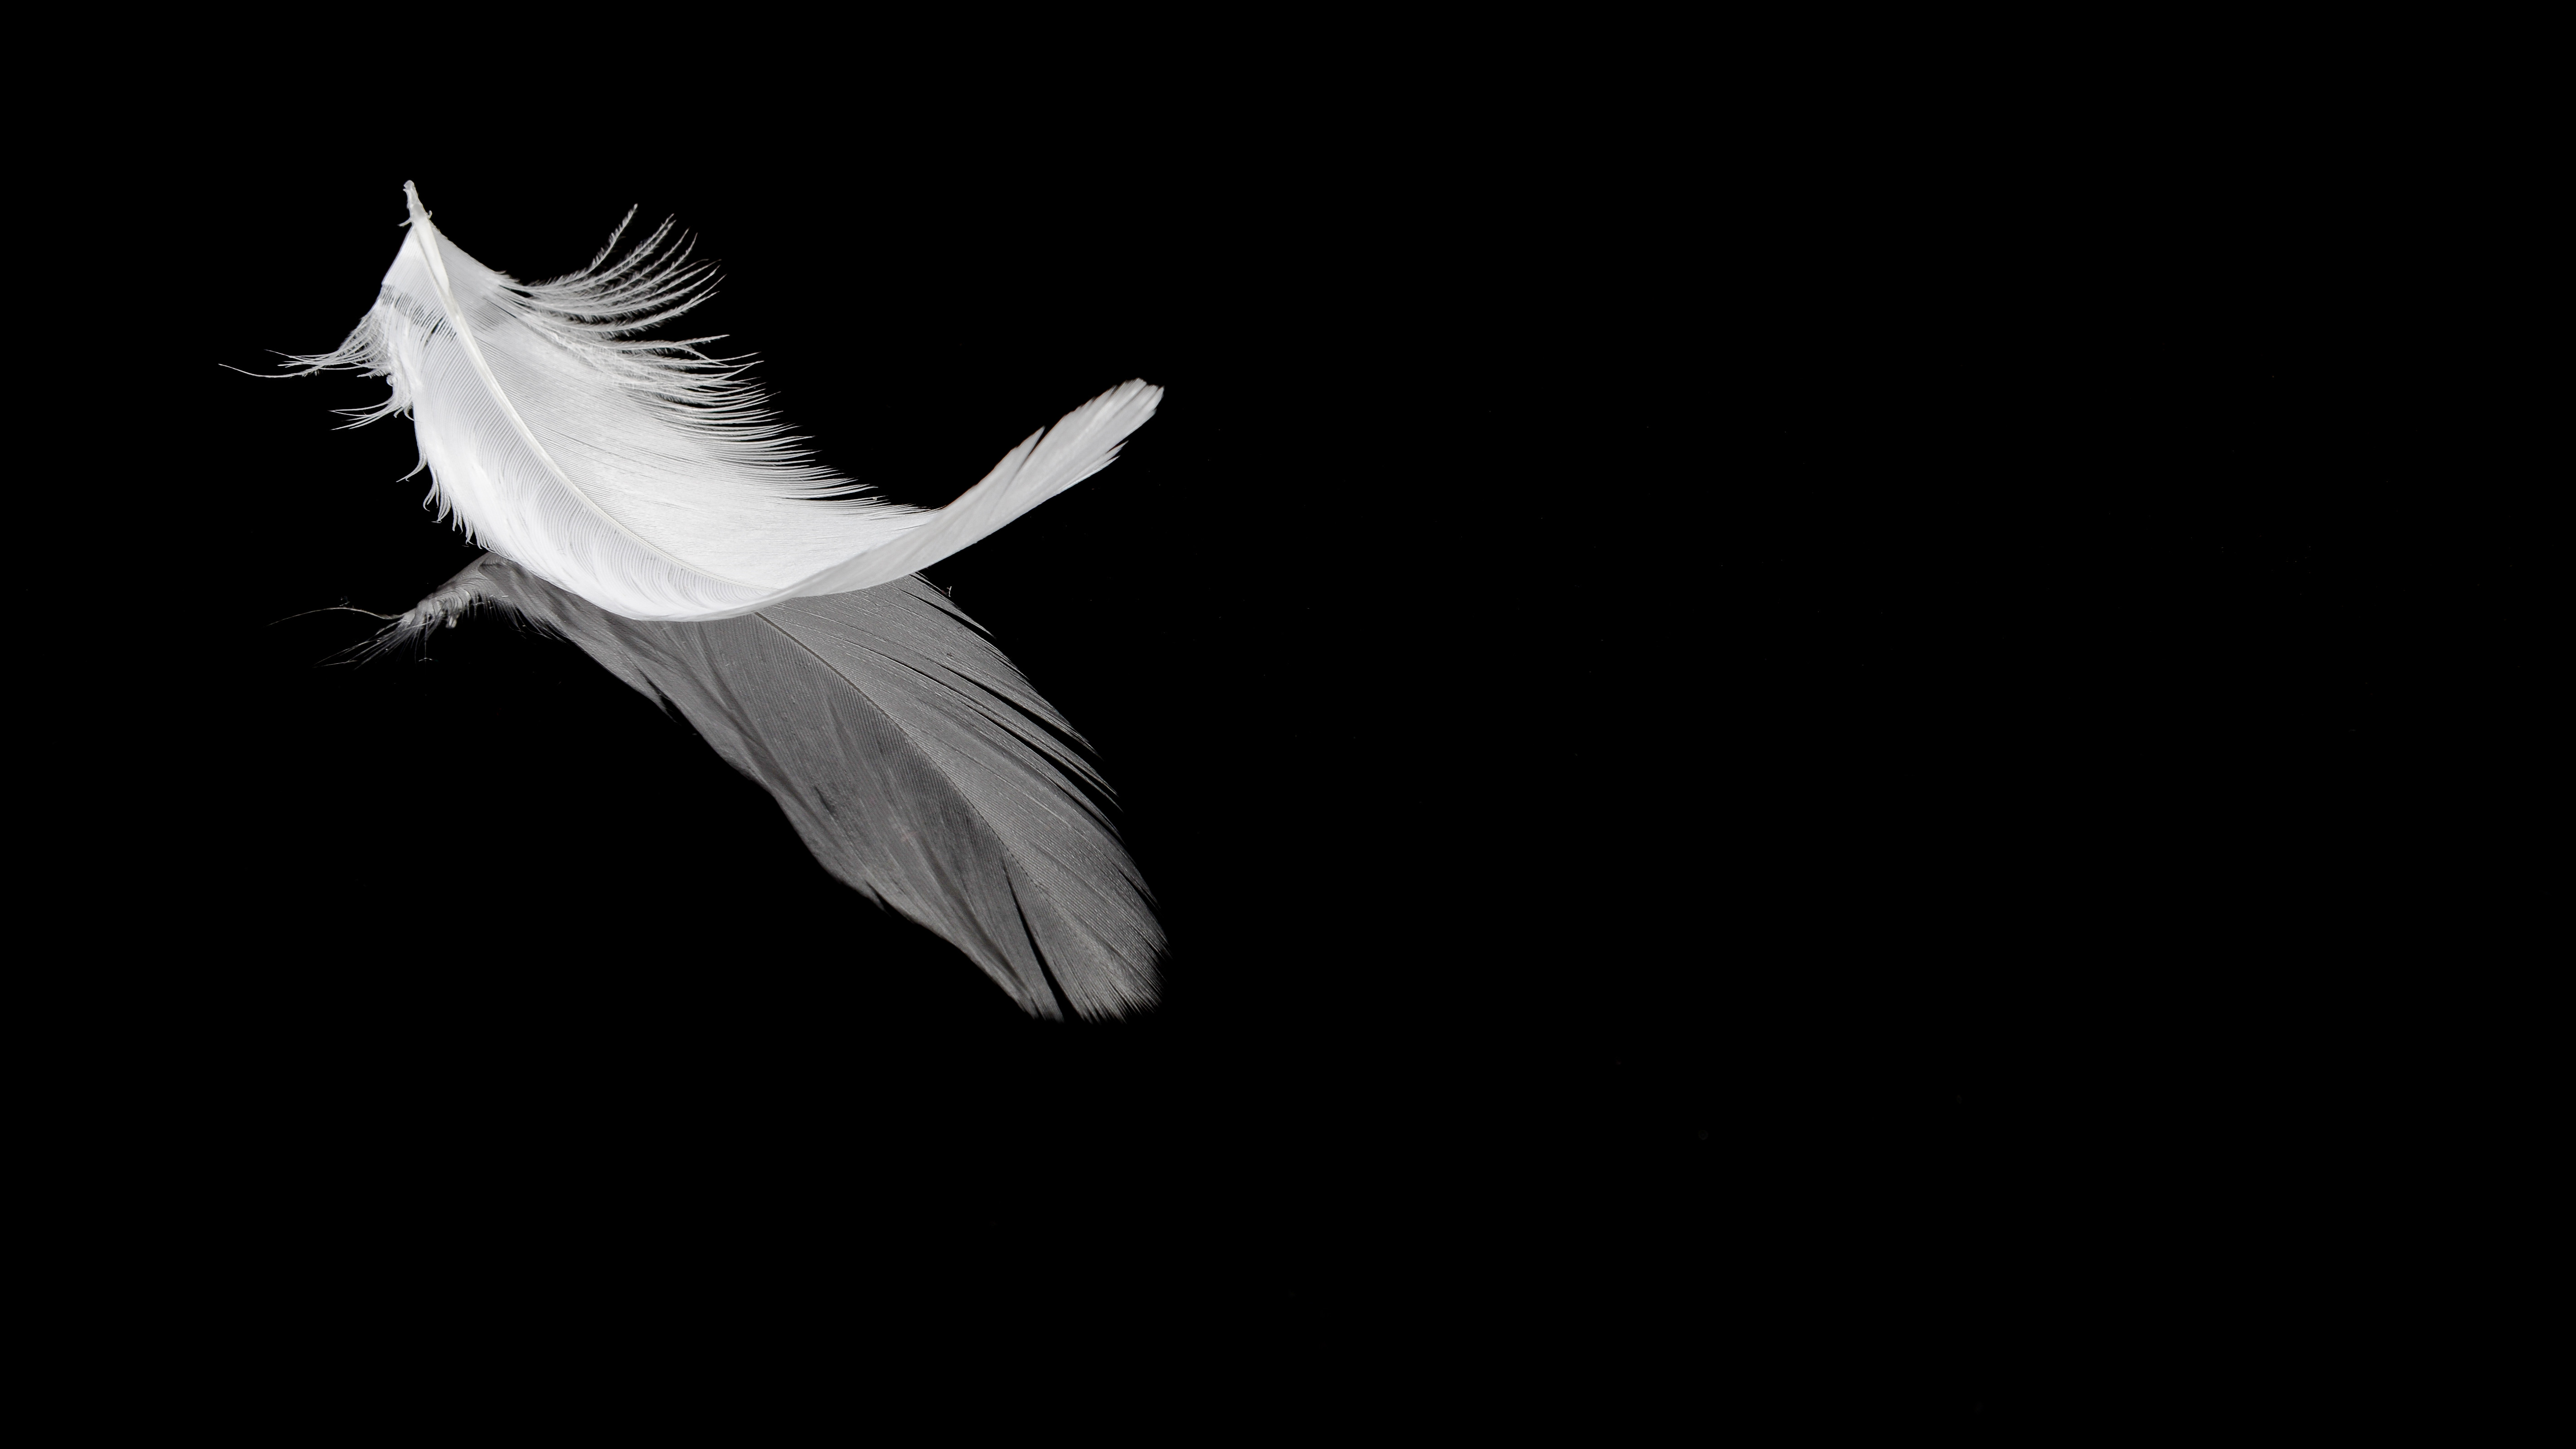 black, reflection, feather, bw, chb, pen cell phone wallpapers